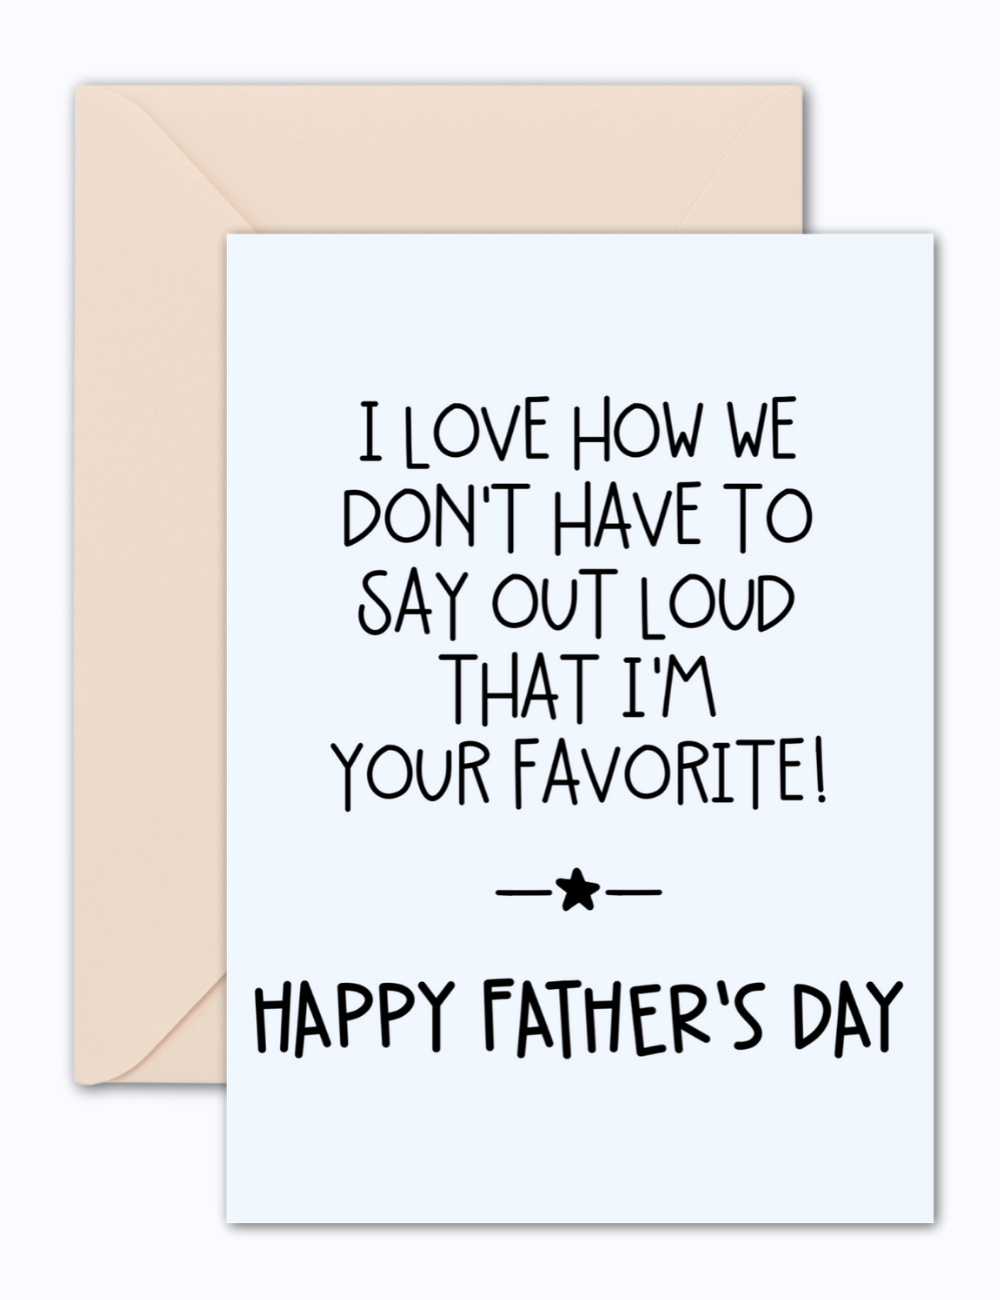 Father's Day Cards - Free Printable